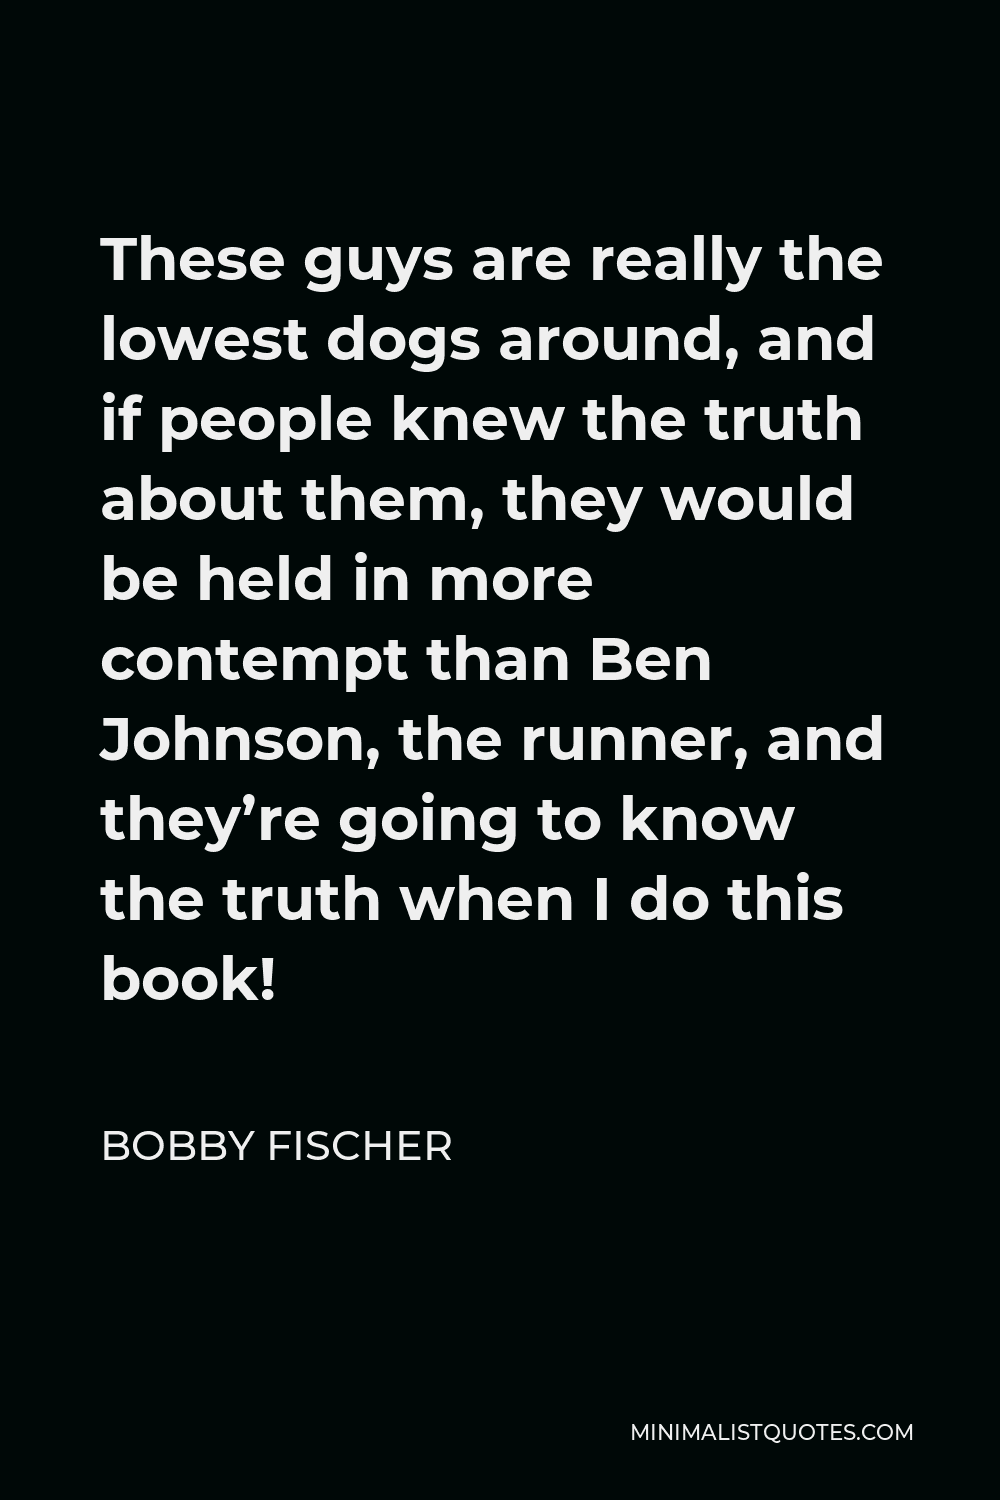 Bobby Fischer Quote - These guys are really the lowest dogs around, and if people knew the truth about them, they would be held in more contempt than Ben Johnson, the runner, and they’re going to know the truth when I do this book!